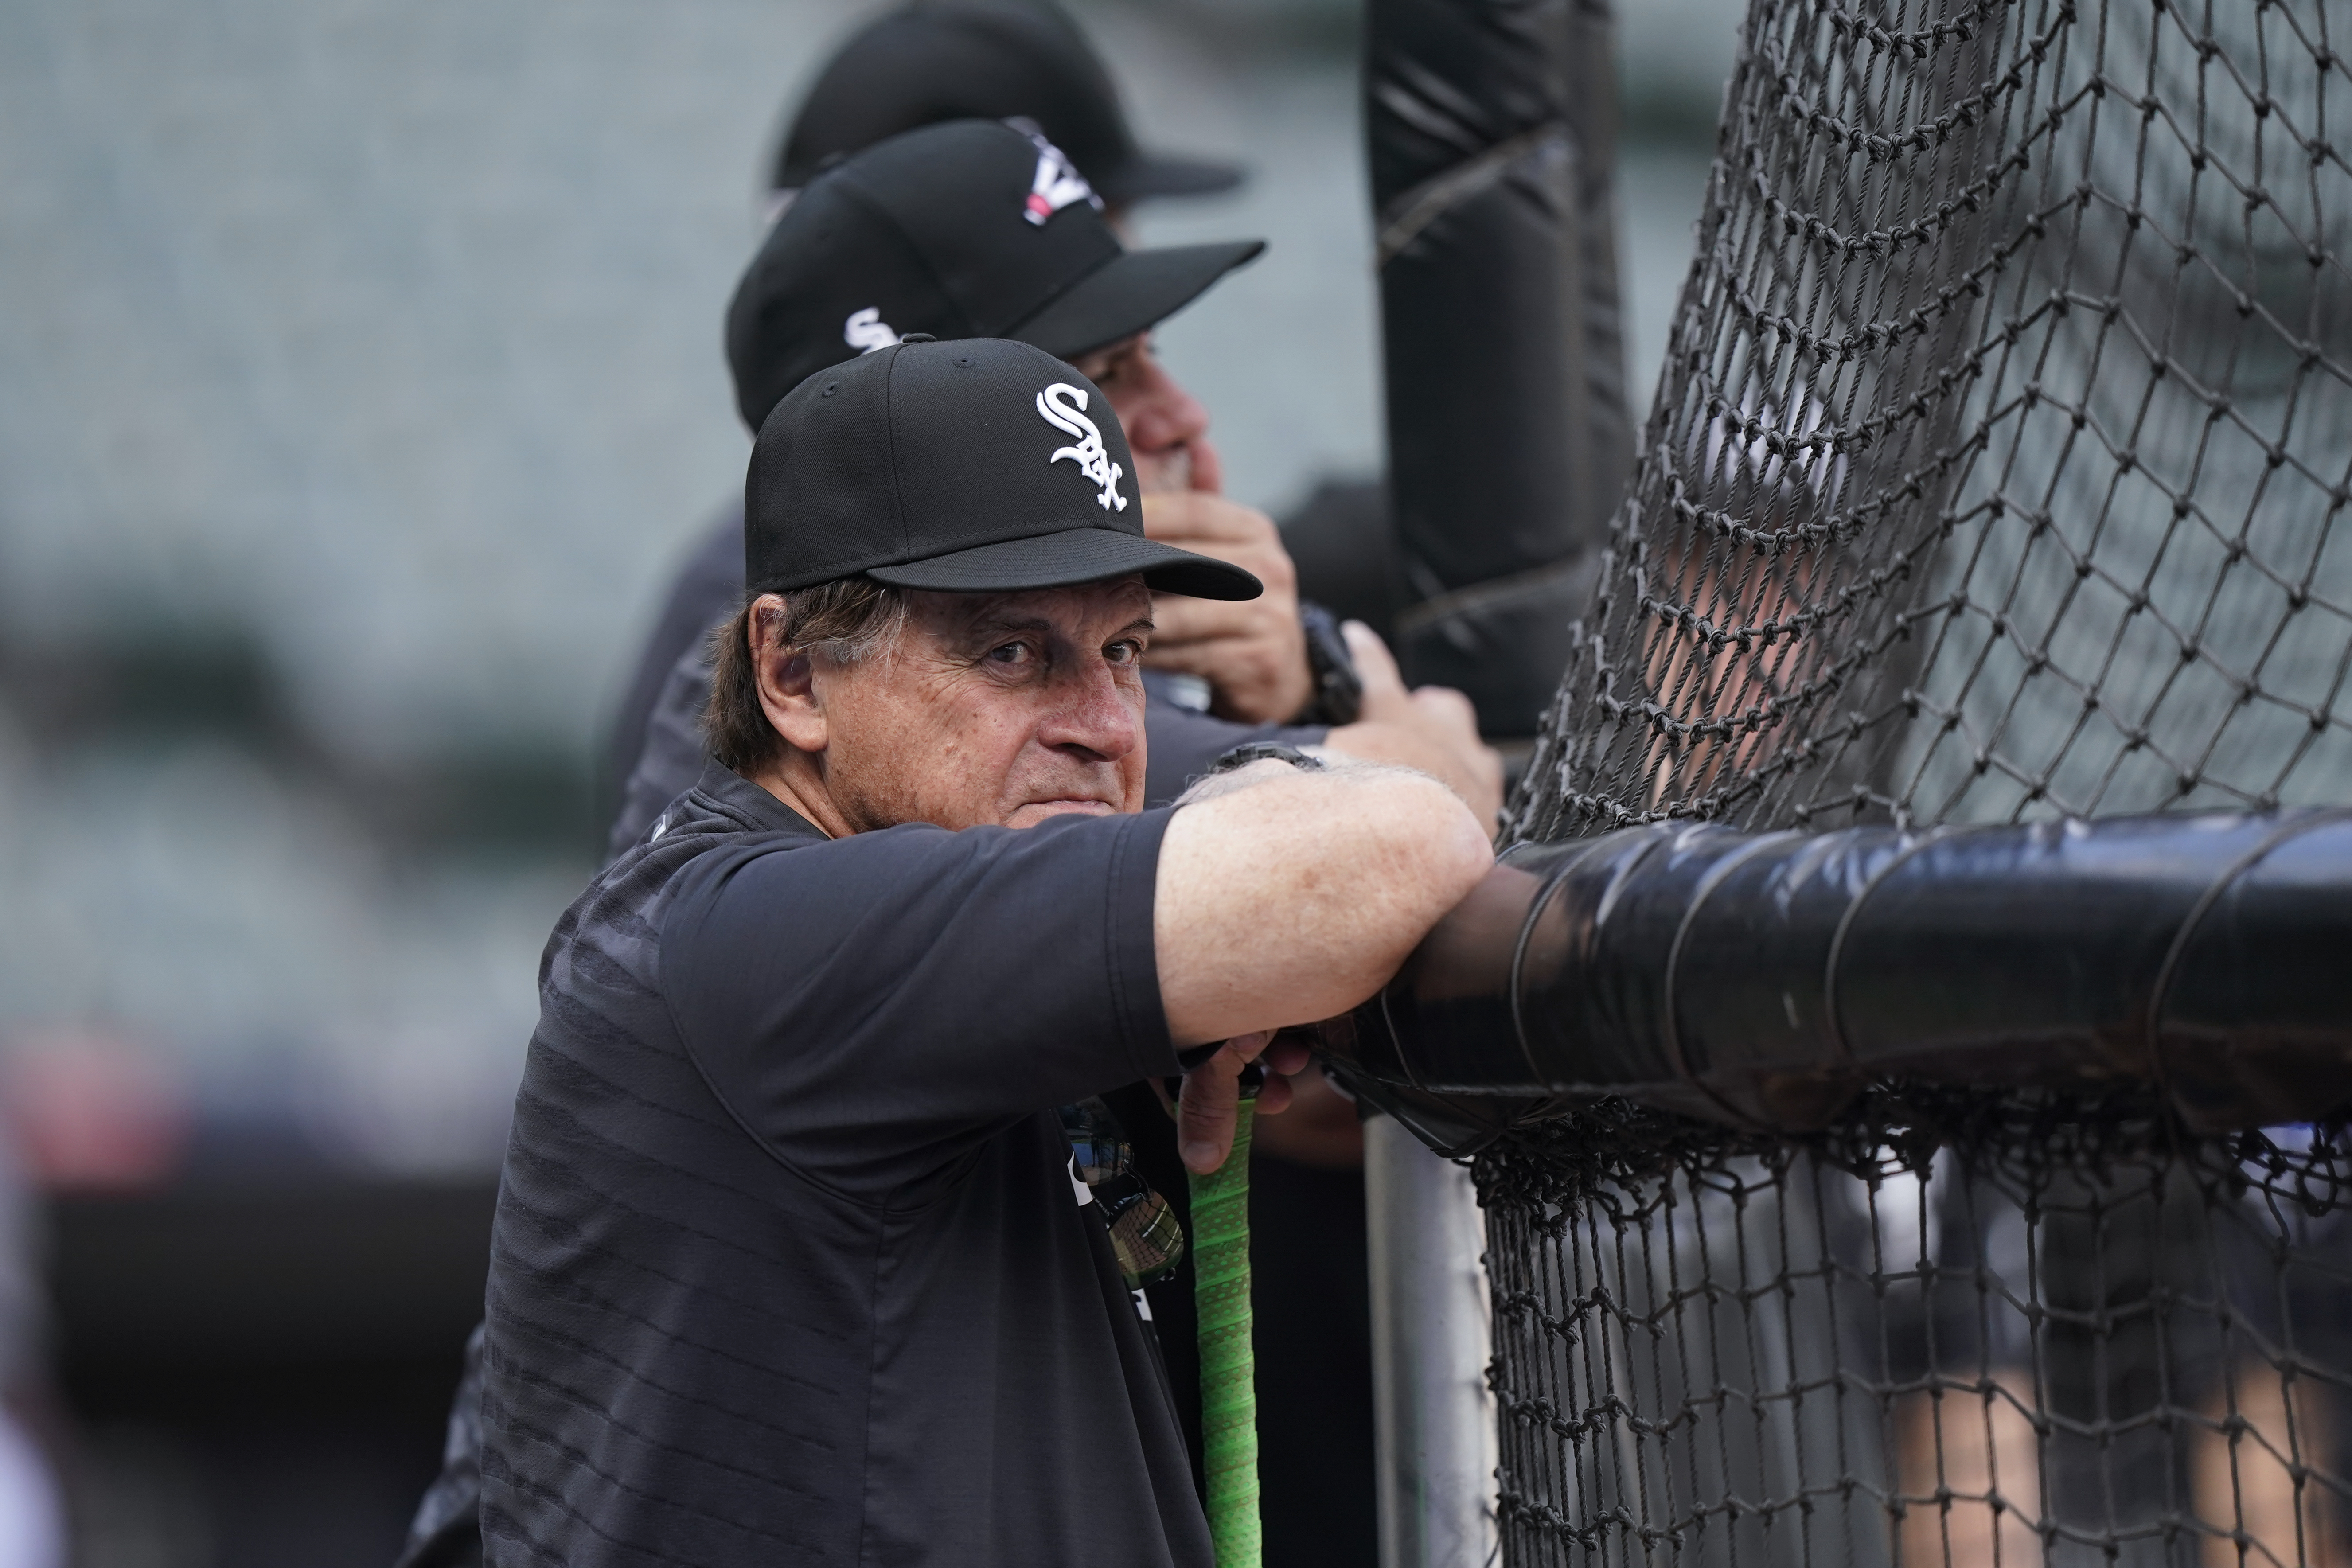 LOOK: White Sox manager Tony La Russa appears to nearly fall